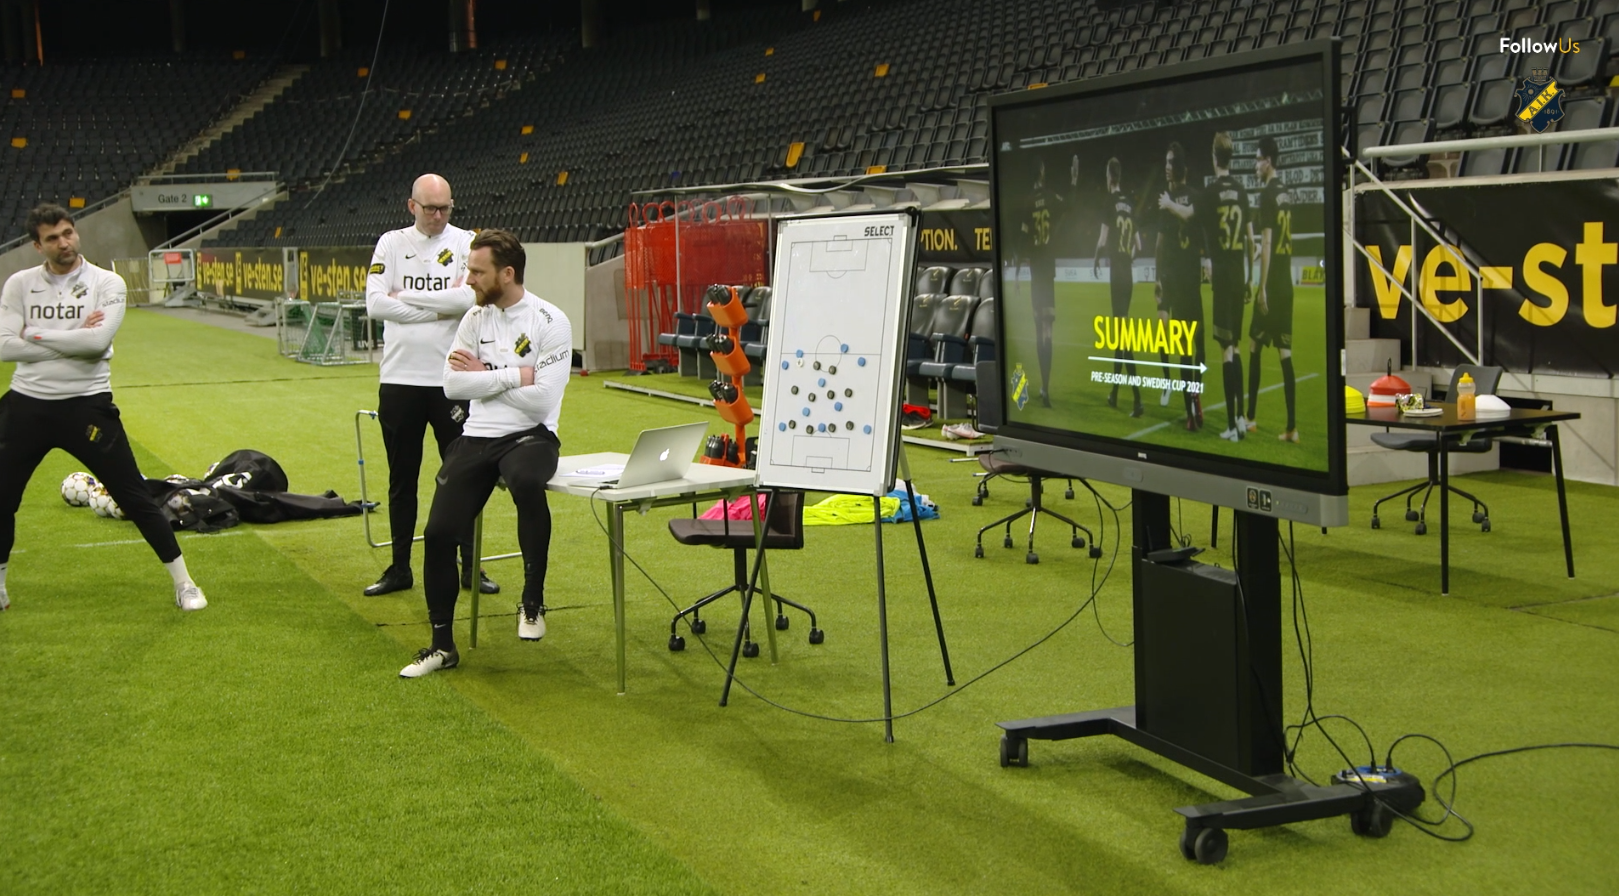 AIK fotball improved team trainings with BenQ displays and presentation device